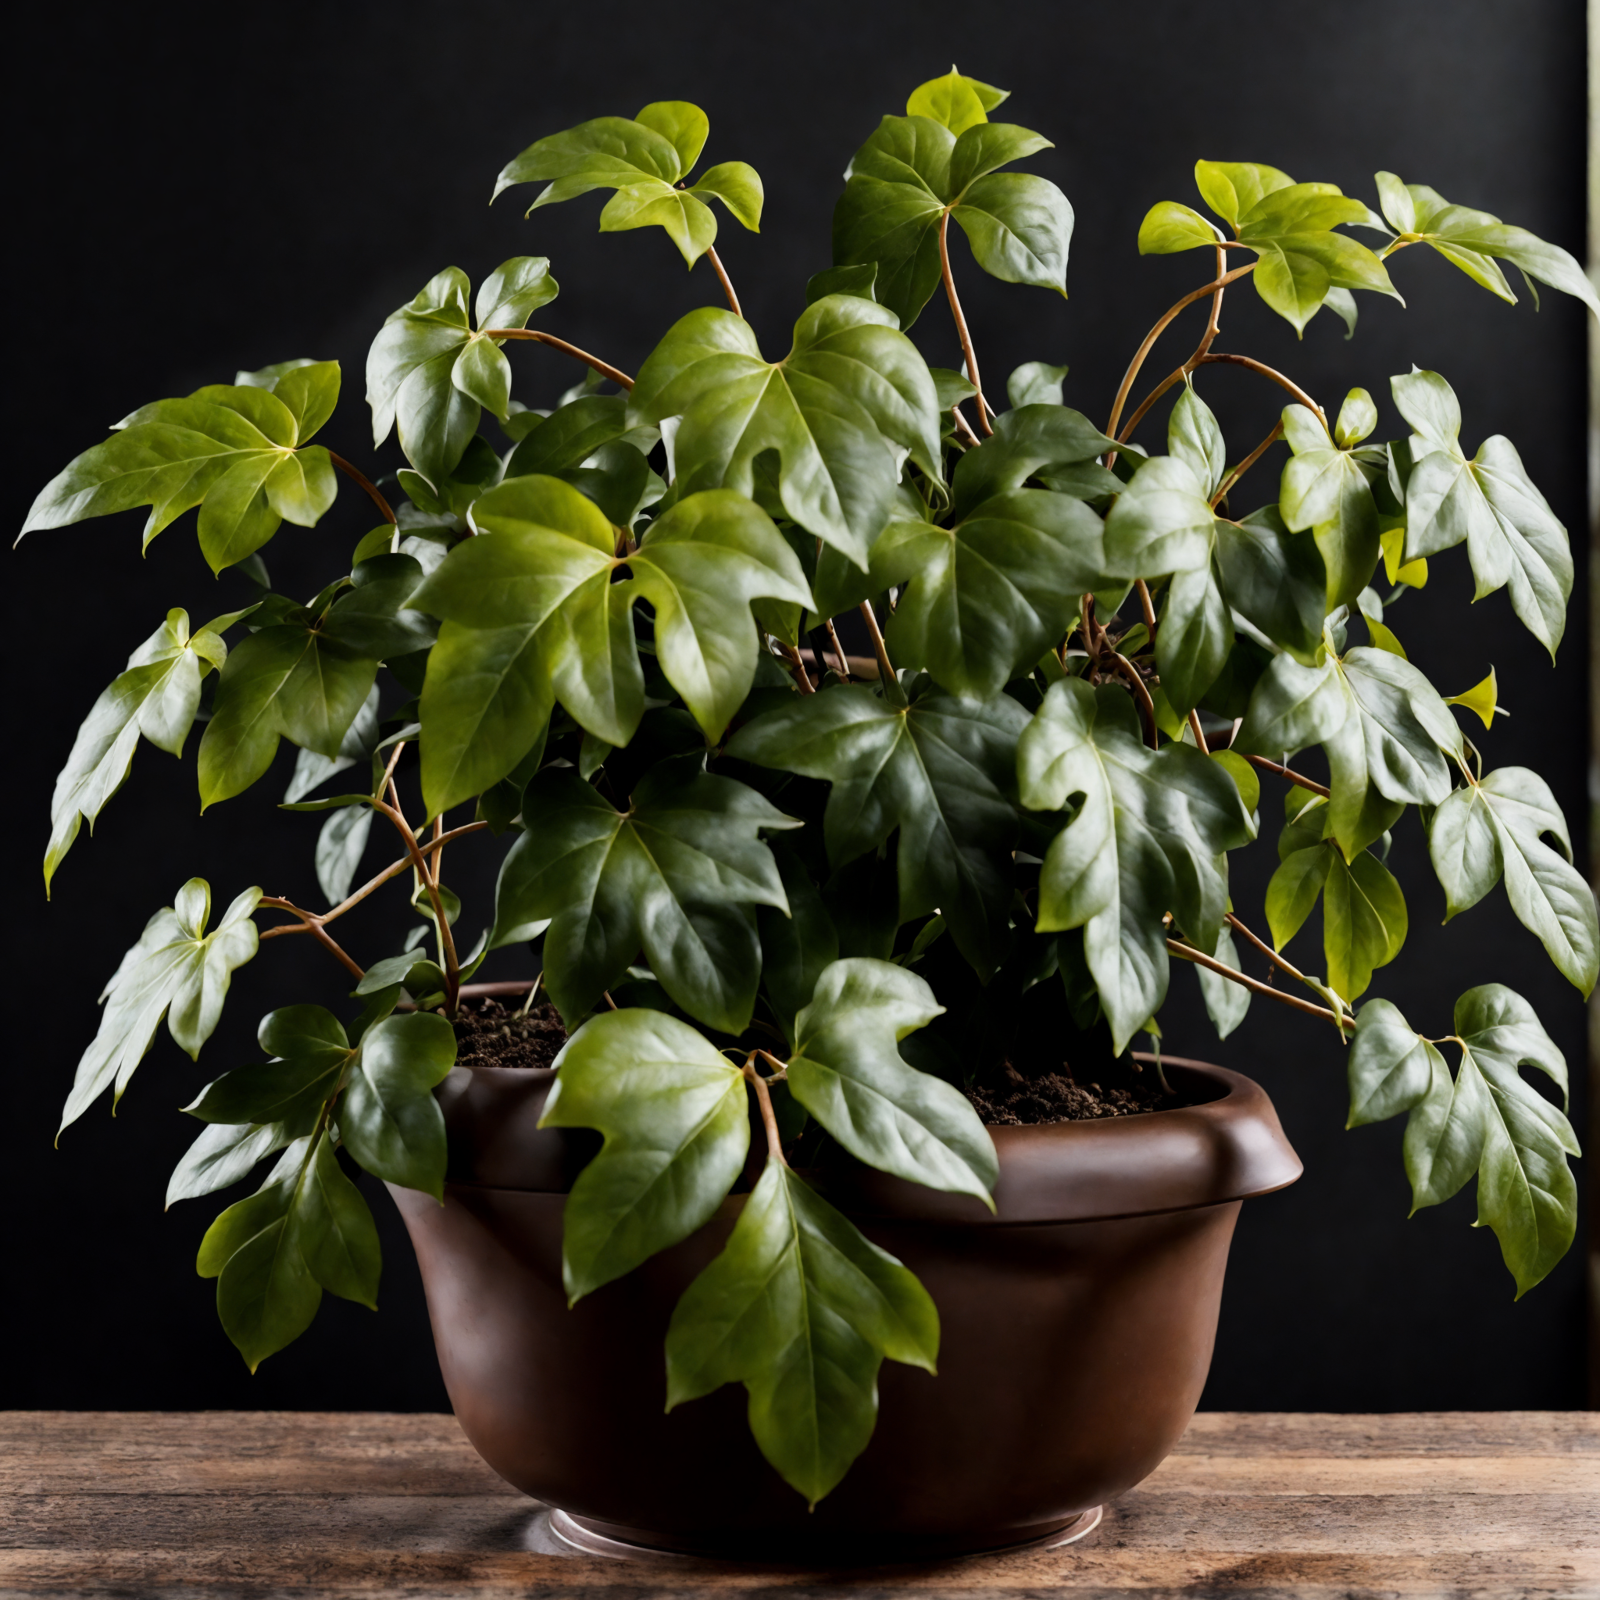 A Cissus alata plant in a brown bowl on a wooden table, with clear lighting and a dark background.